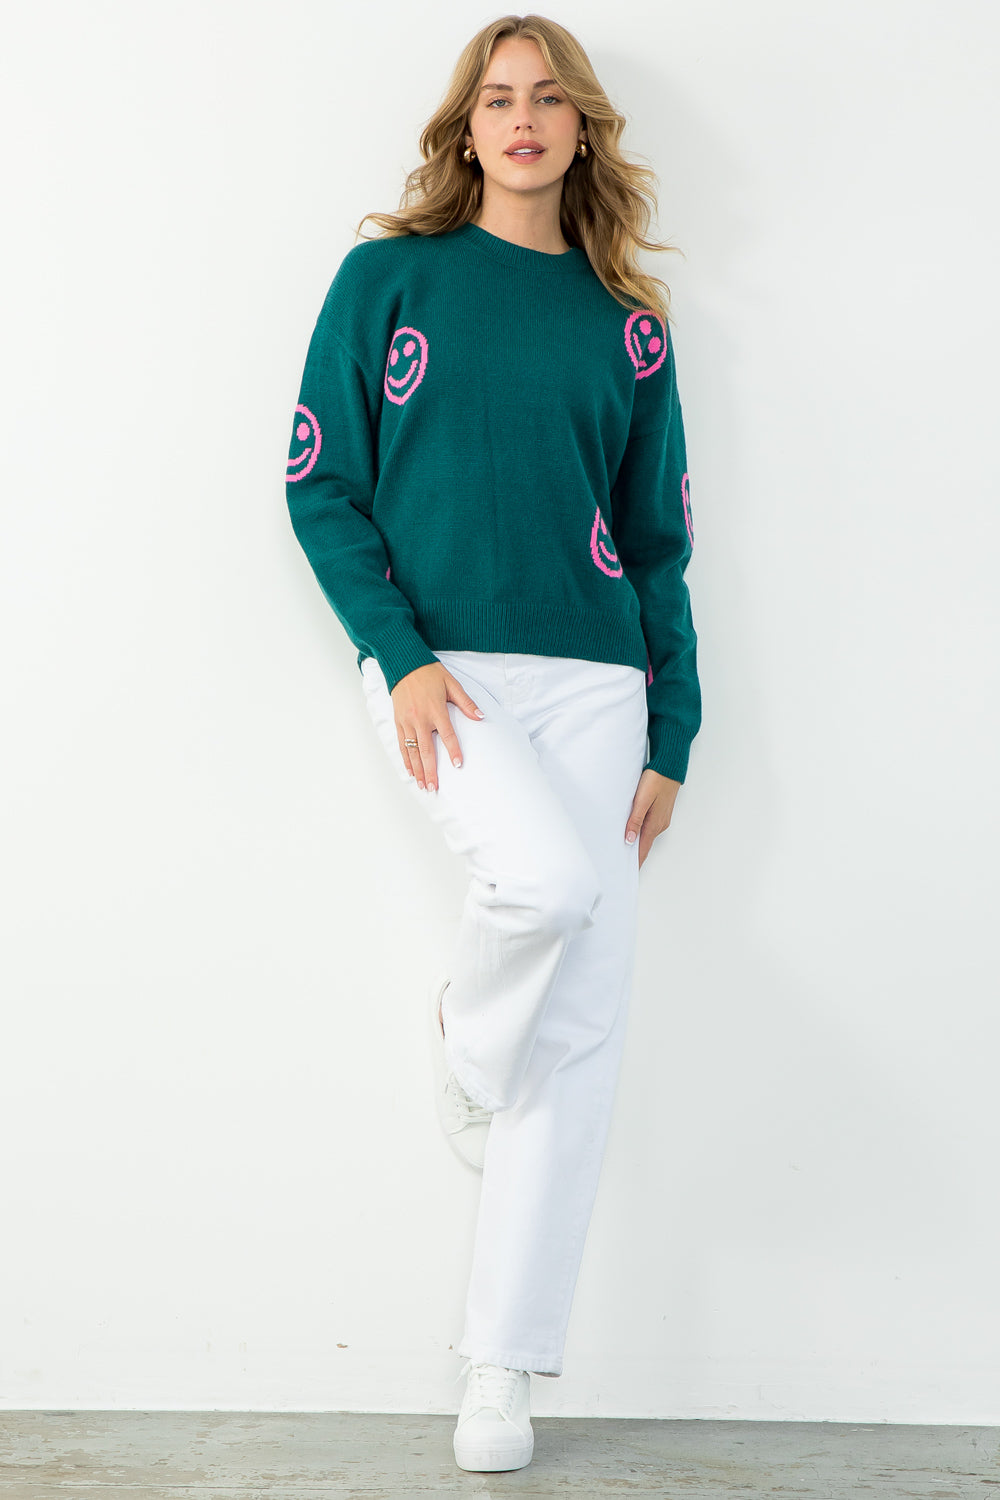 Smiley Face Rib Knit Sweater in Teal